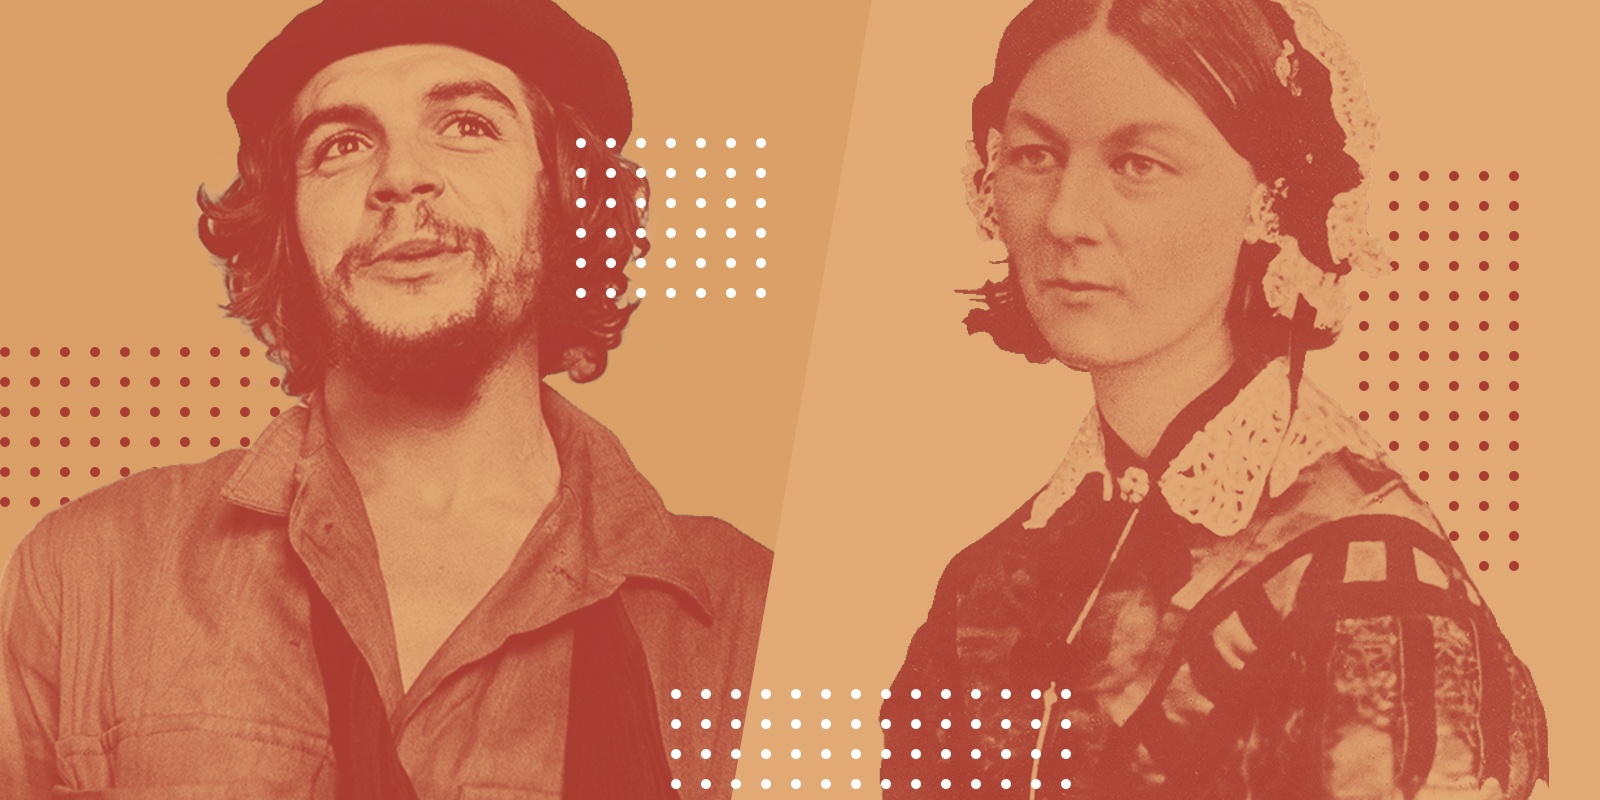 Grow a Business in a Recession: What Would Florence Nightingale or Che Guevara do?